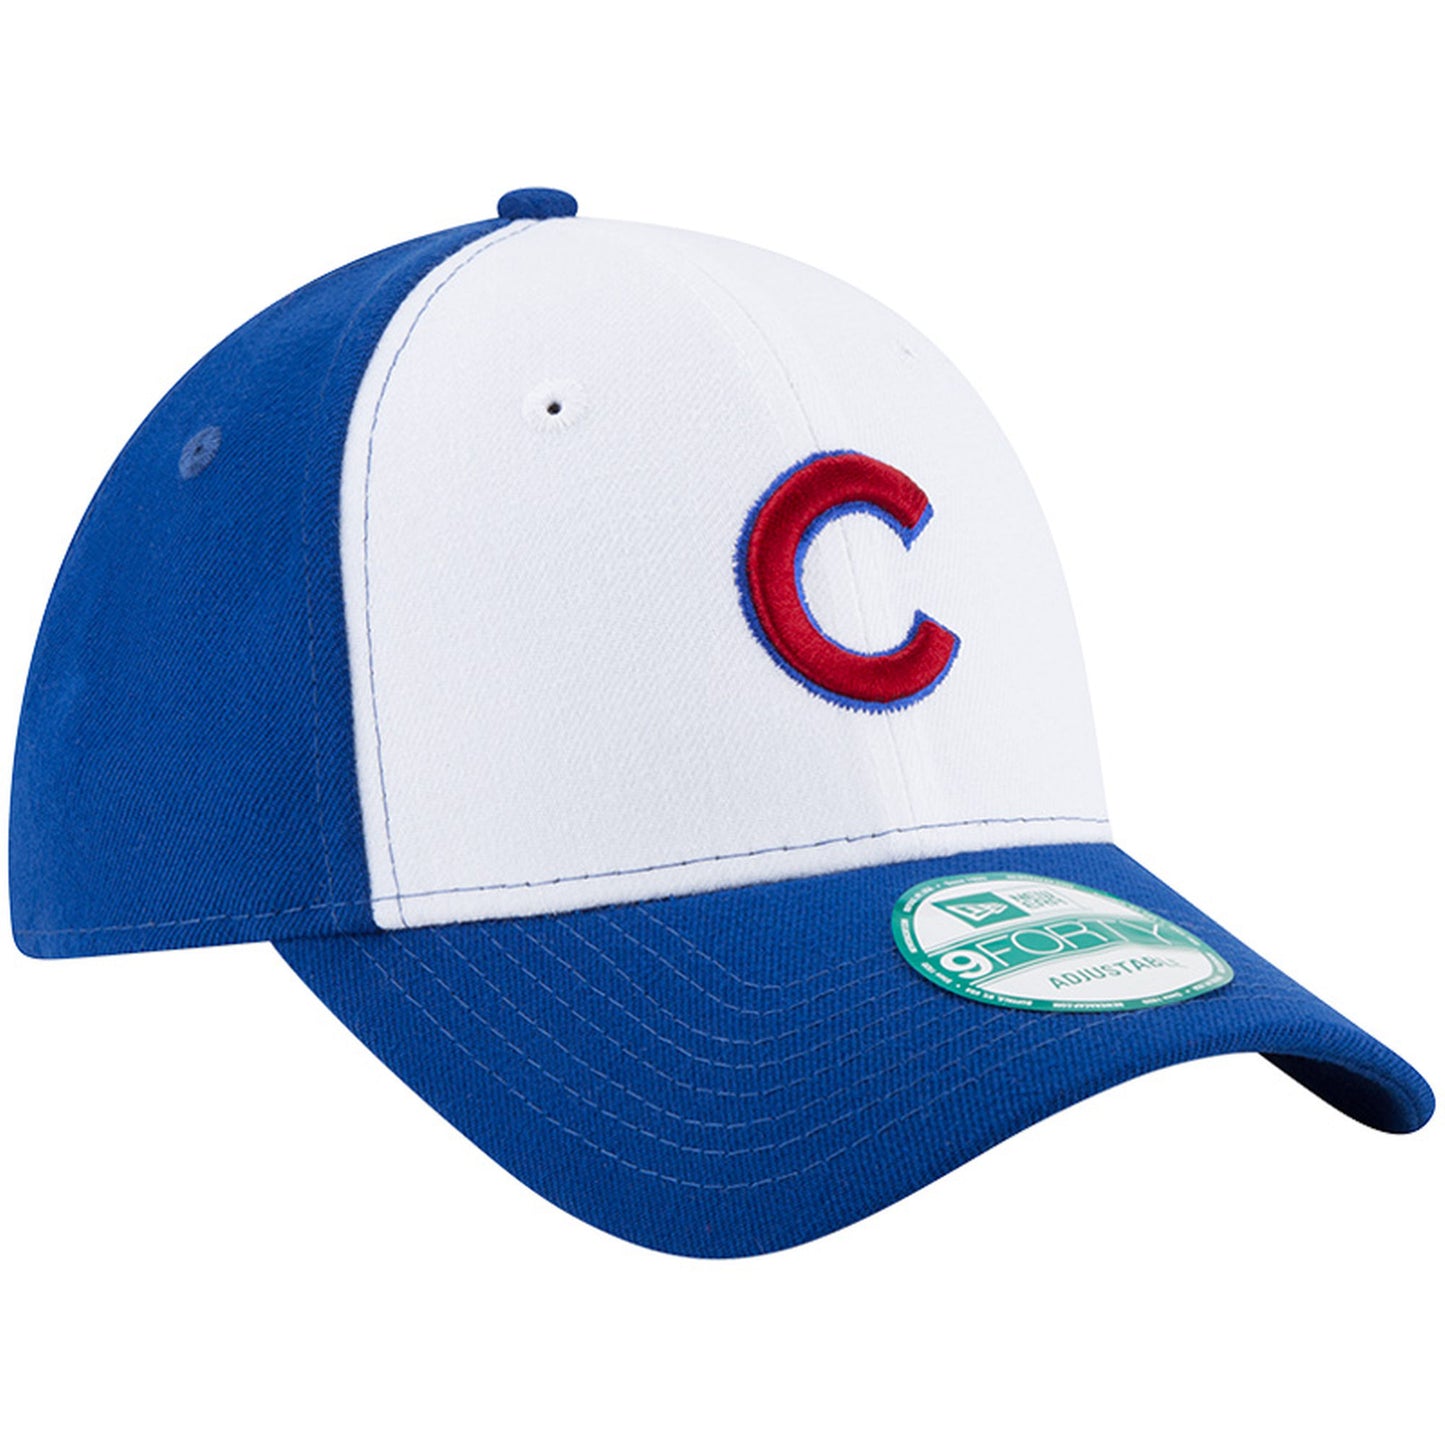 Chicago Cubs 9FORTY The League Adjustable Hat With White Panel Front By New Era